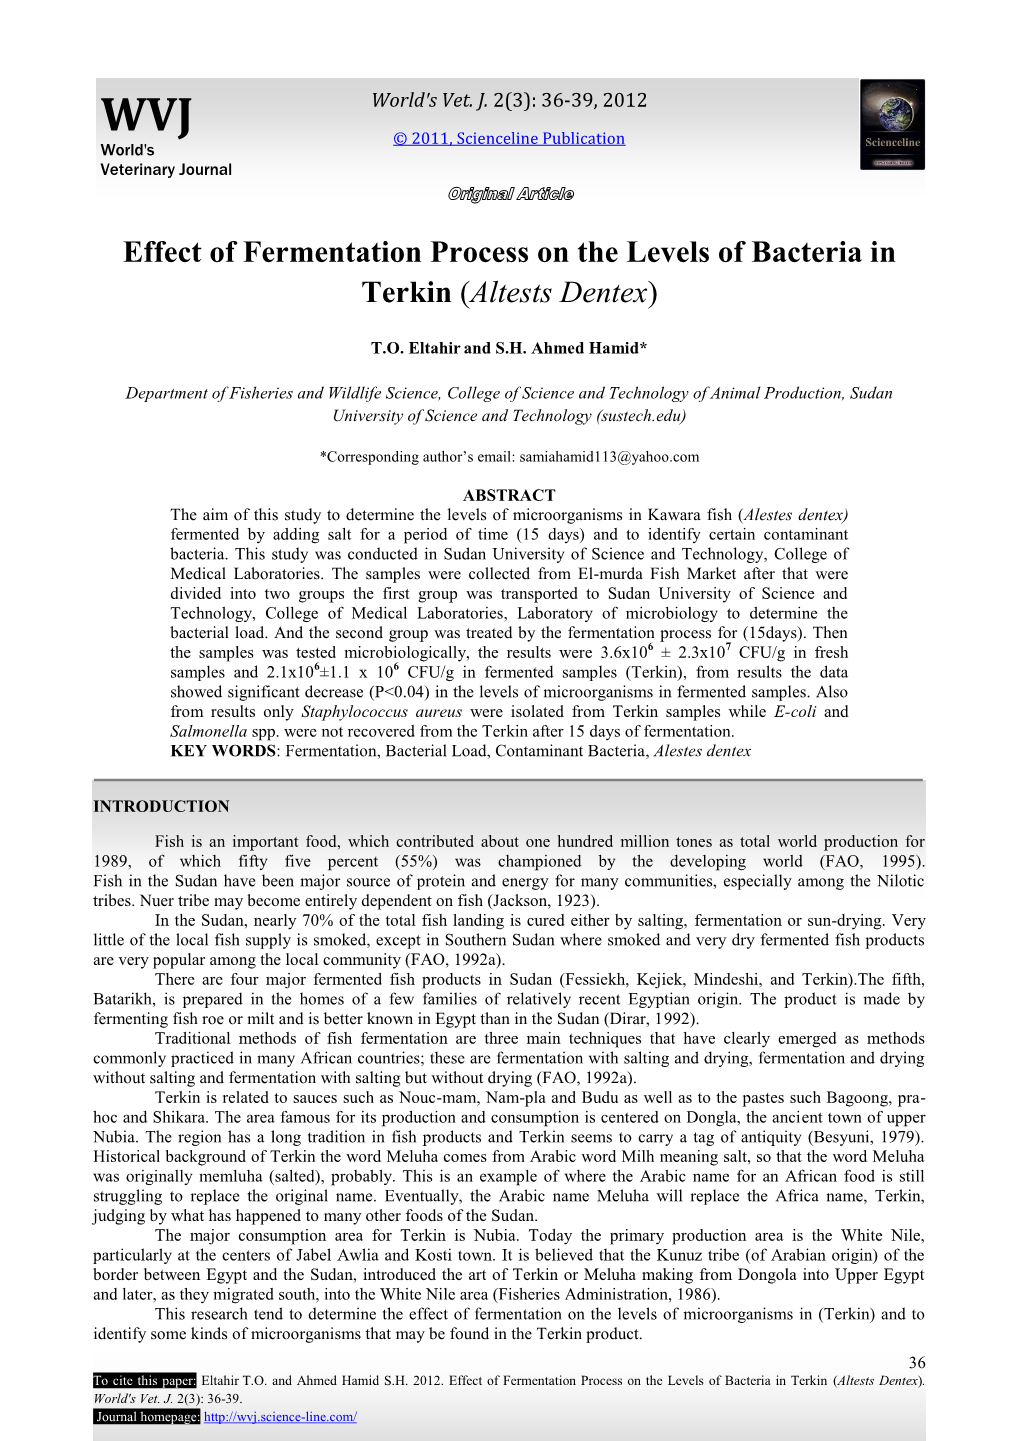 Effect of Fermentation Process on the Levels of Bacteria in Terkin (Altests Dentex)